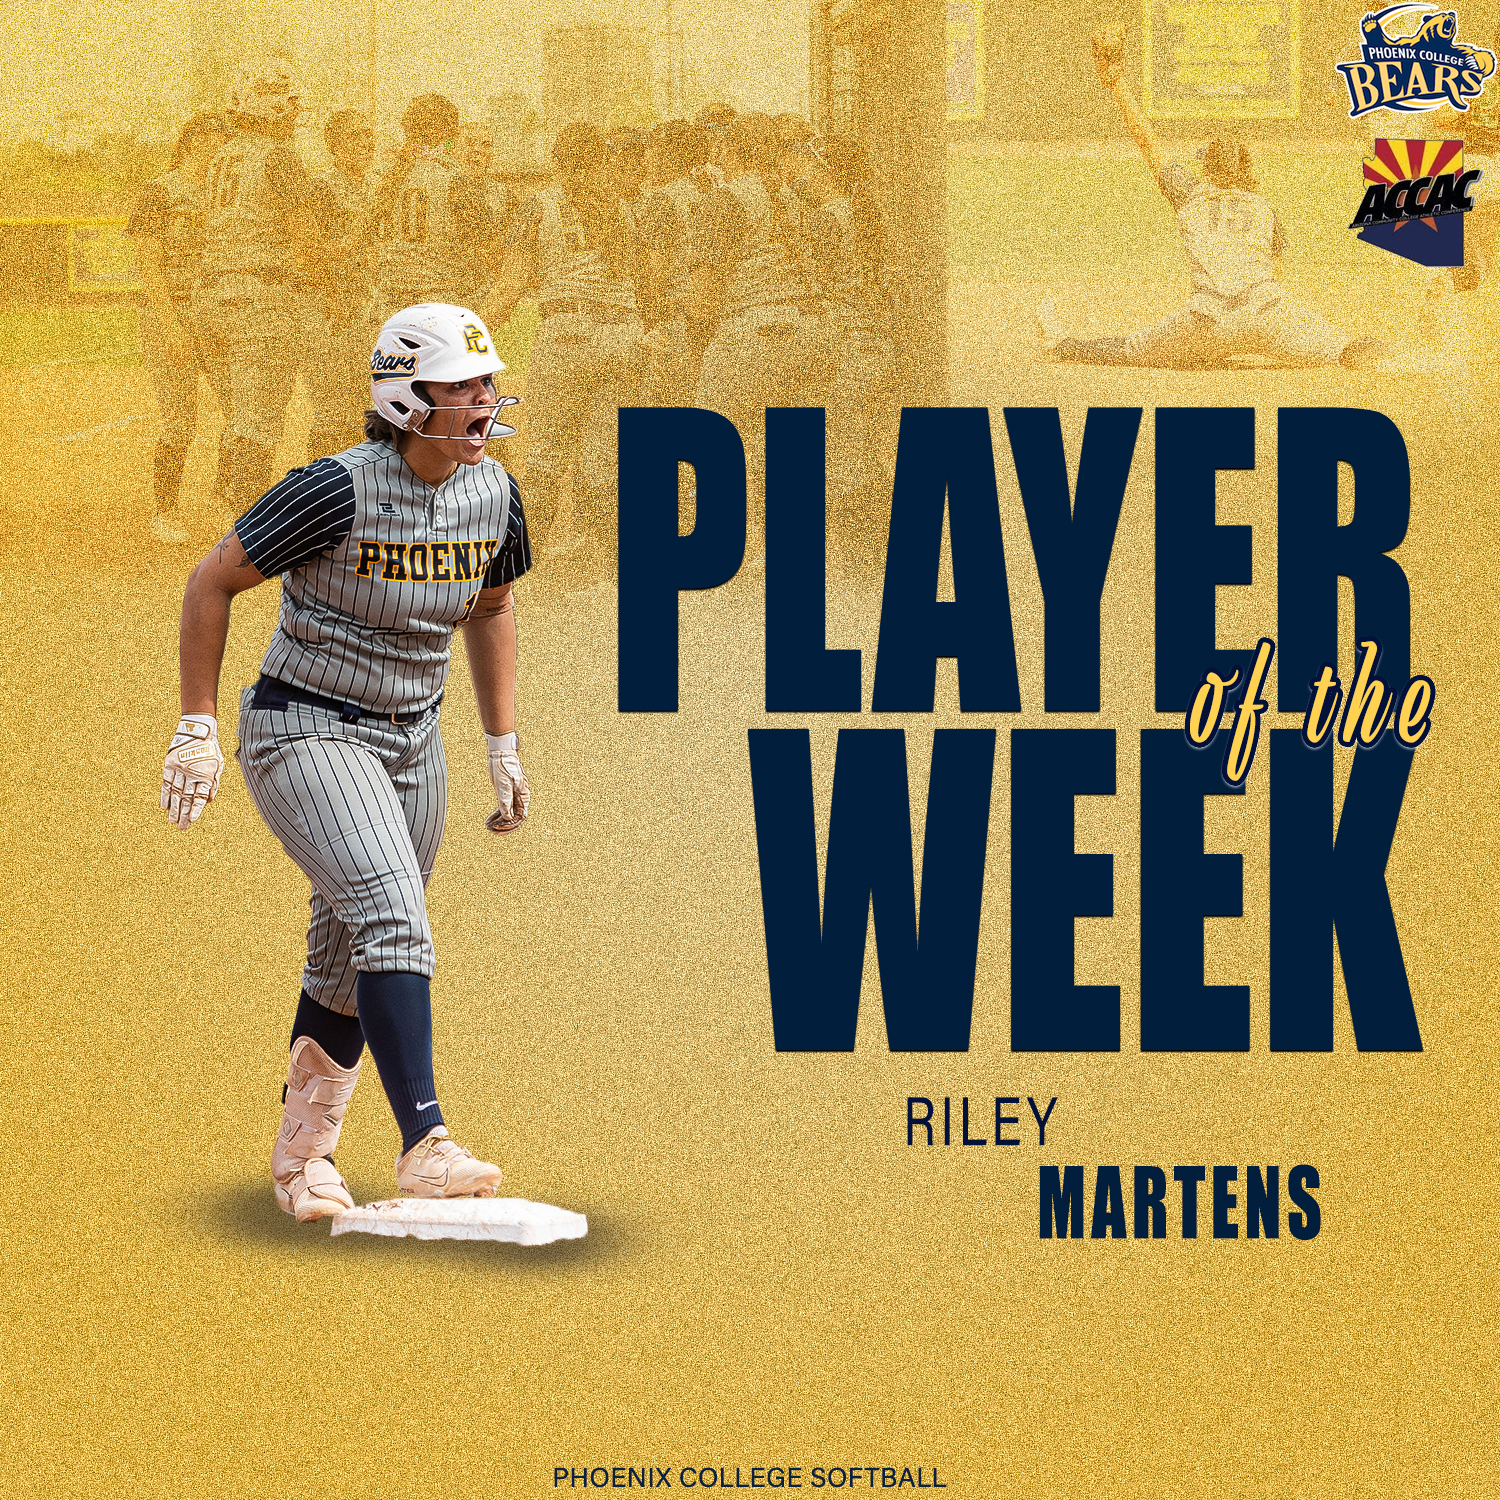 Riley Martens earns Player of the Week